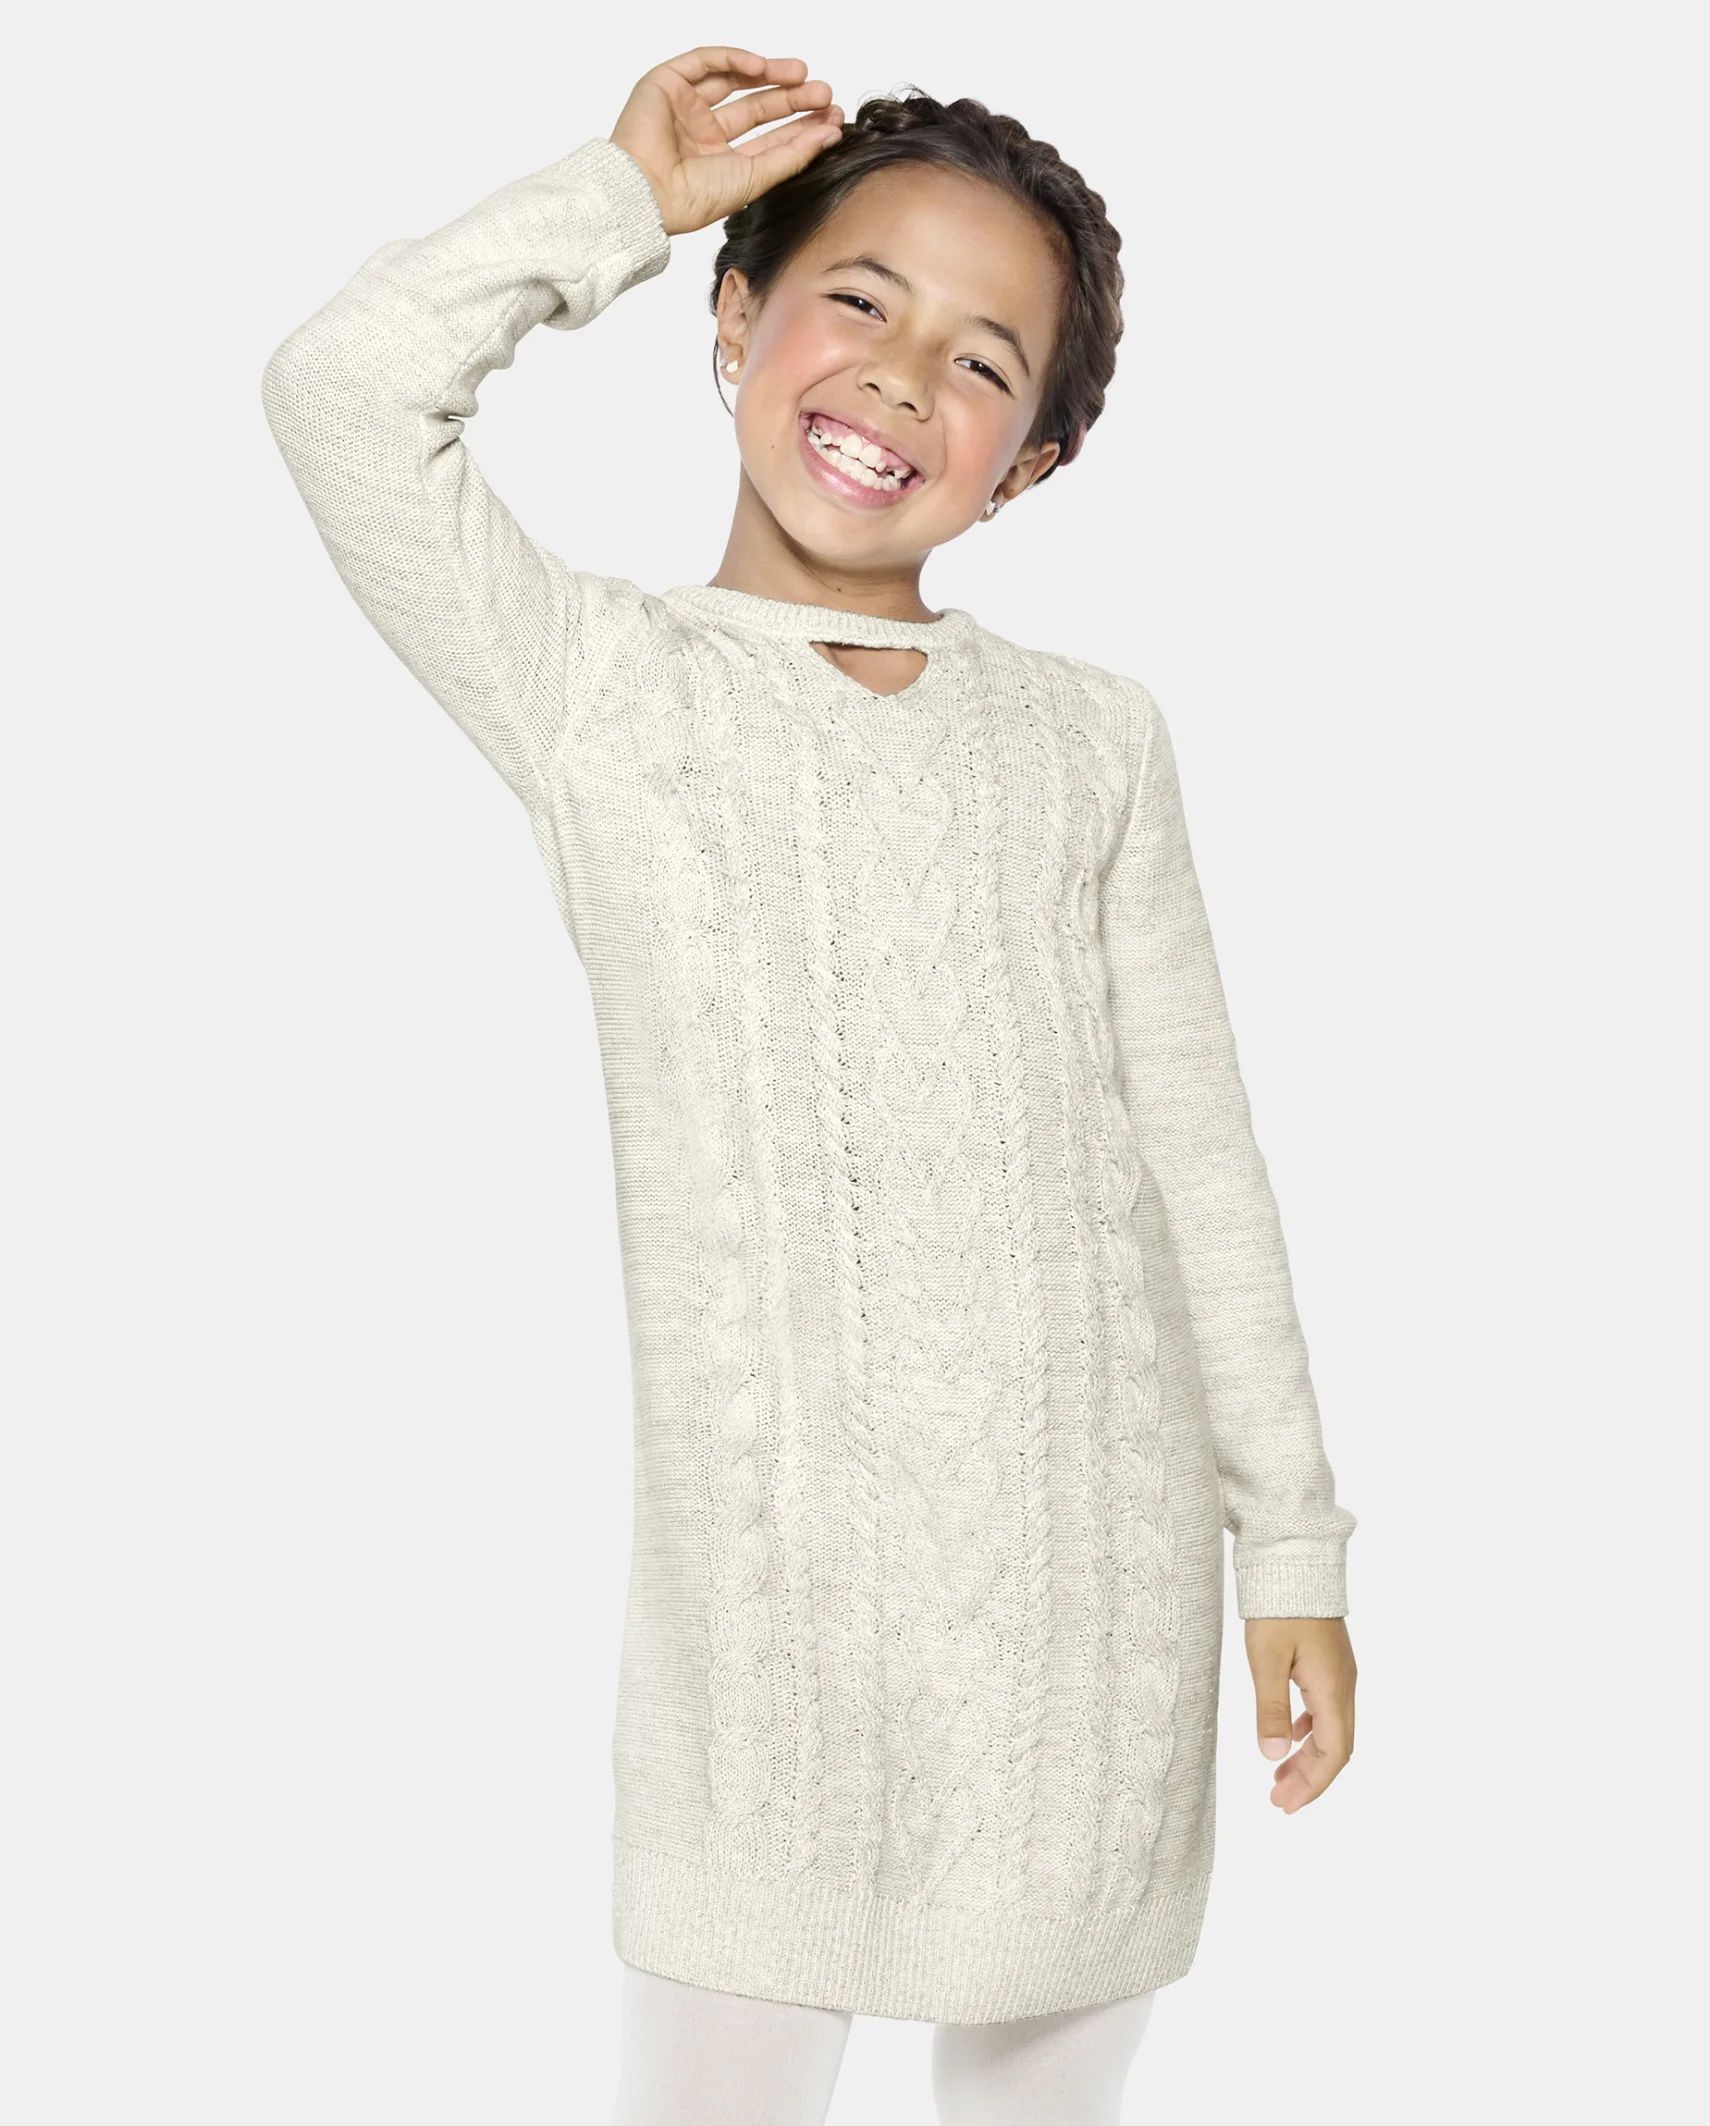 Girls Cable Knit Cut Out Sweater Dress - bunnys tail | The Children's Place